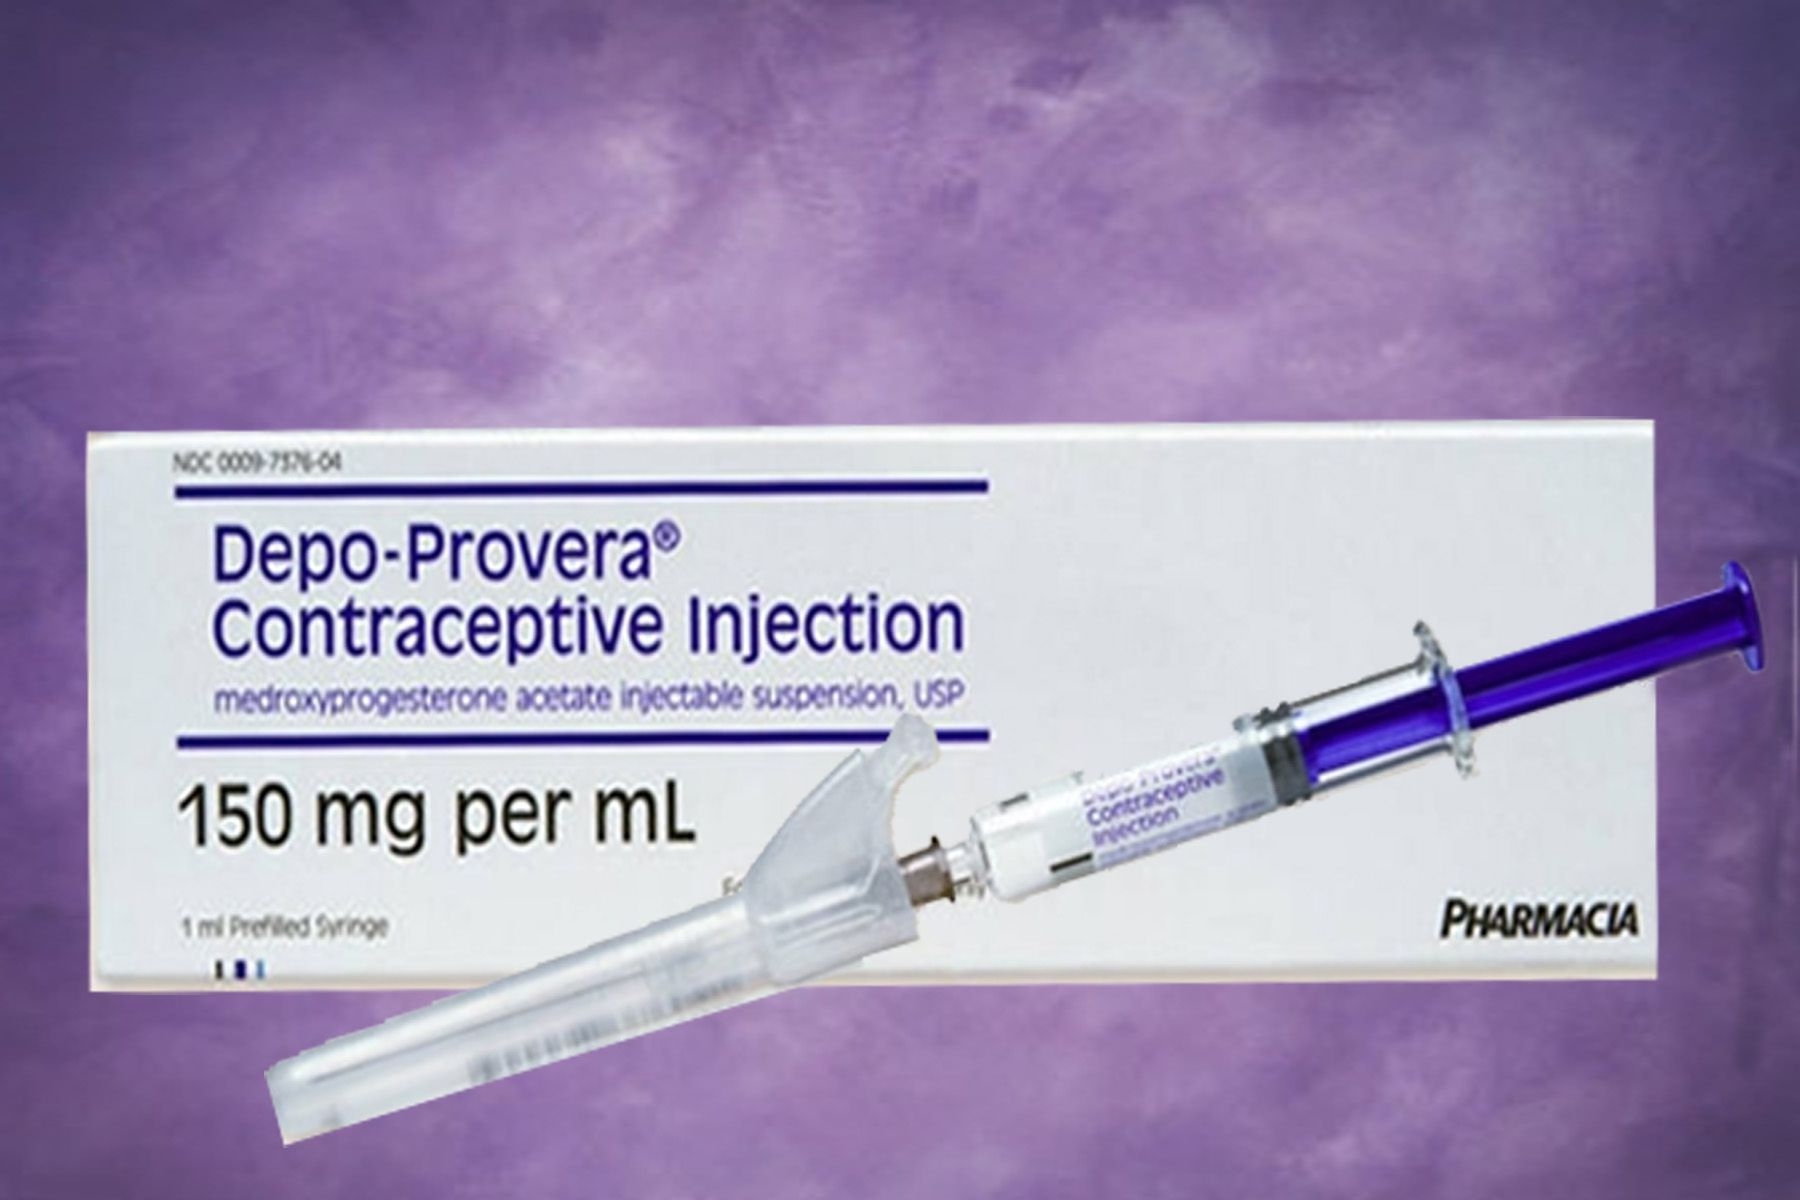 Your First Year Of Depo-Provera Use